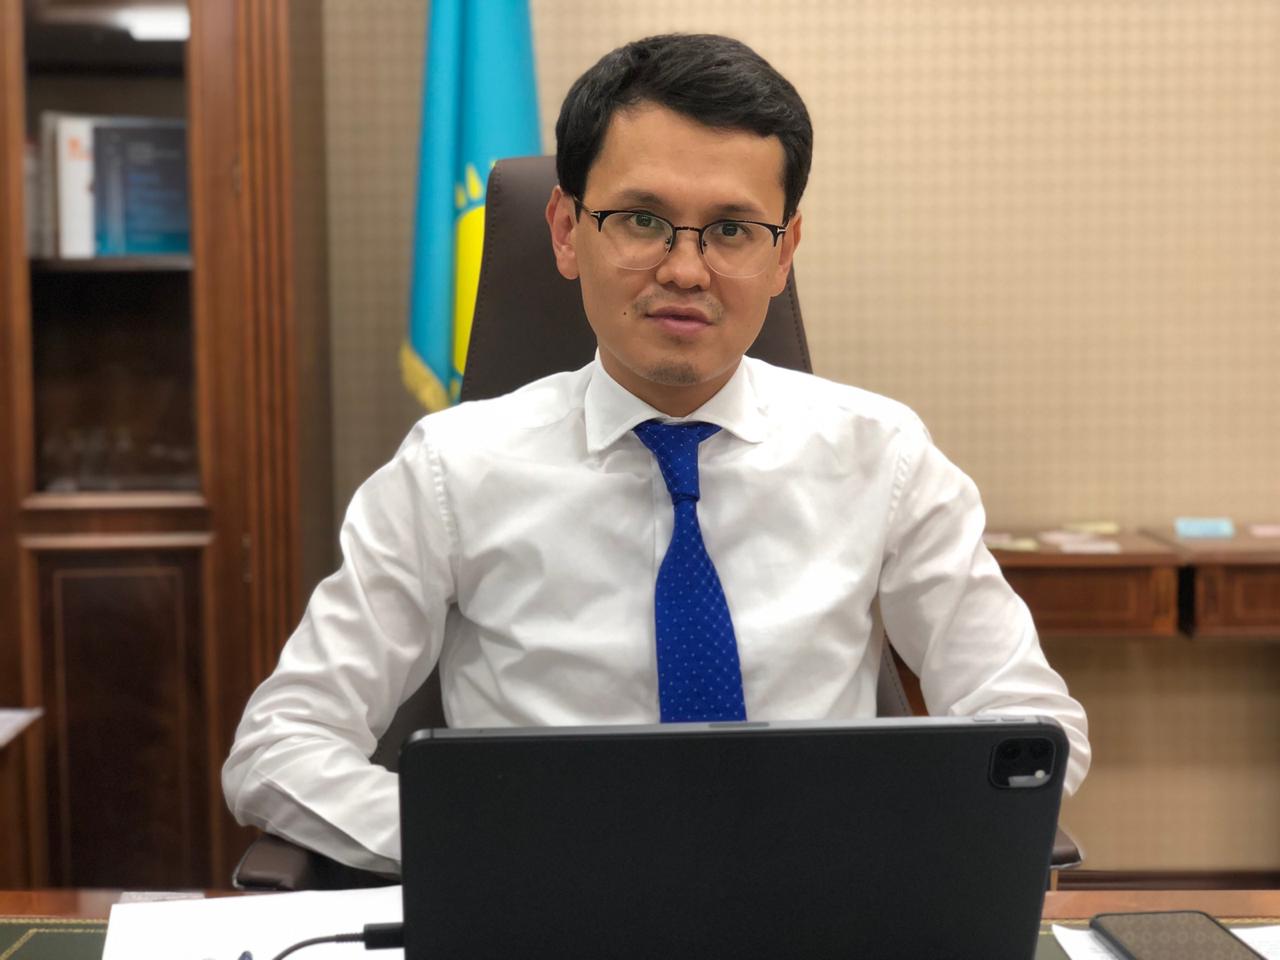 MINISTRY OF DIGITAL DEVELOPMENT AND KASPI.KZ LAUNCHED A NEW SERVICE FOR REGISTRATION AS IE